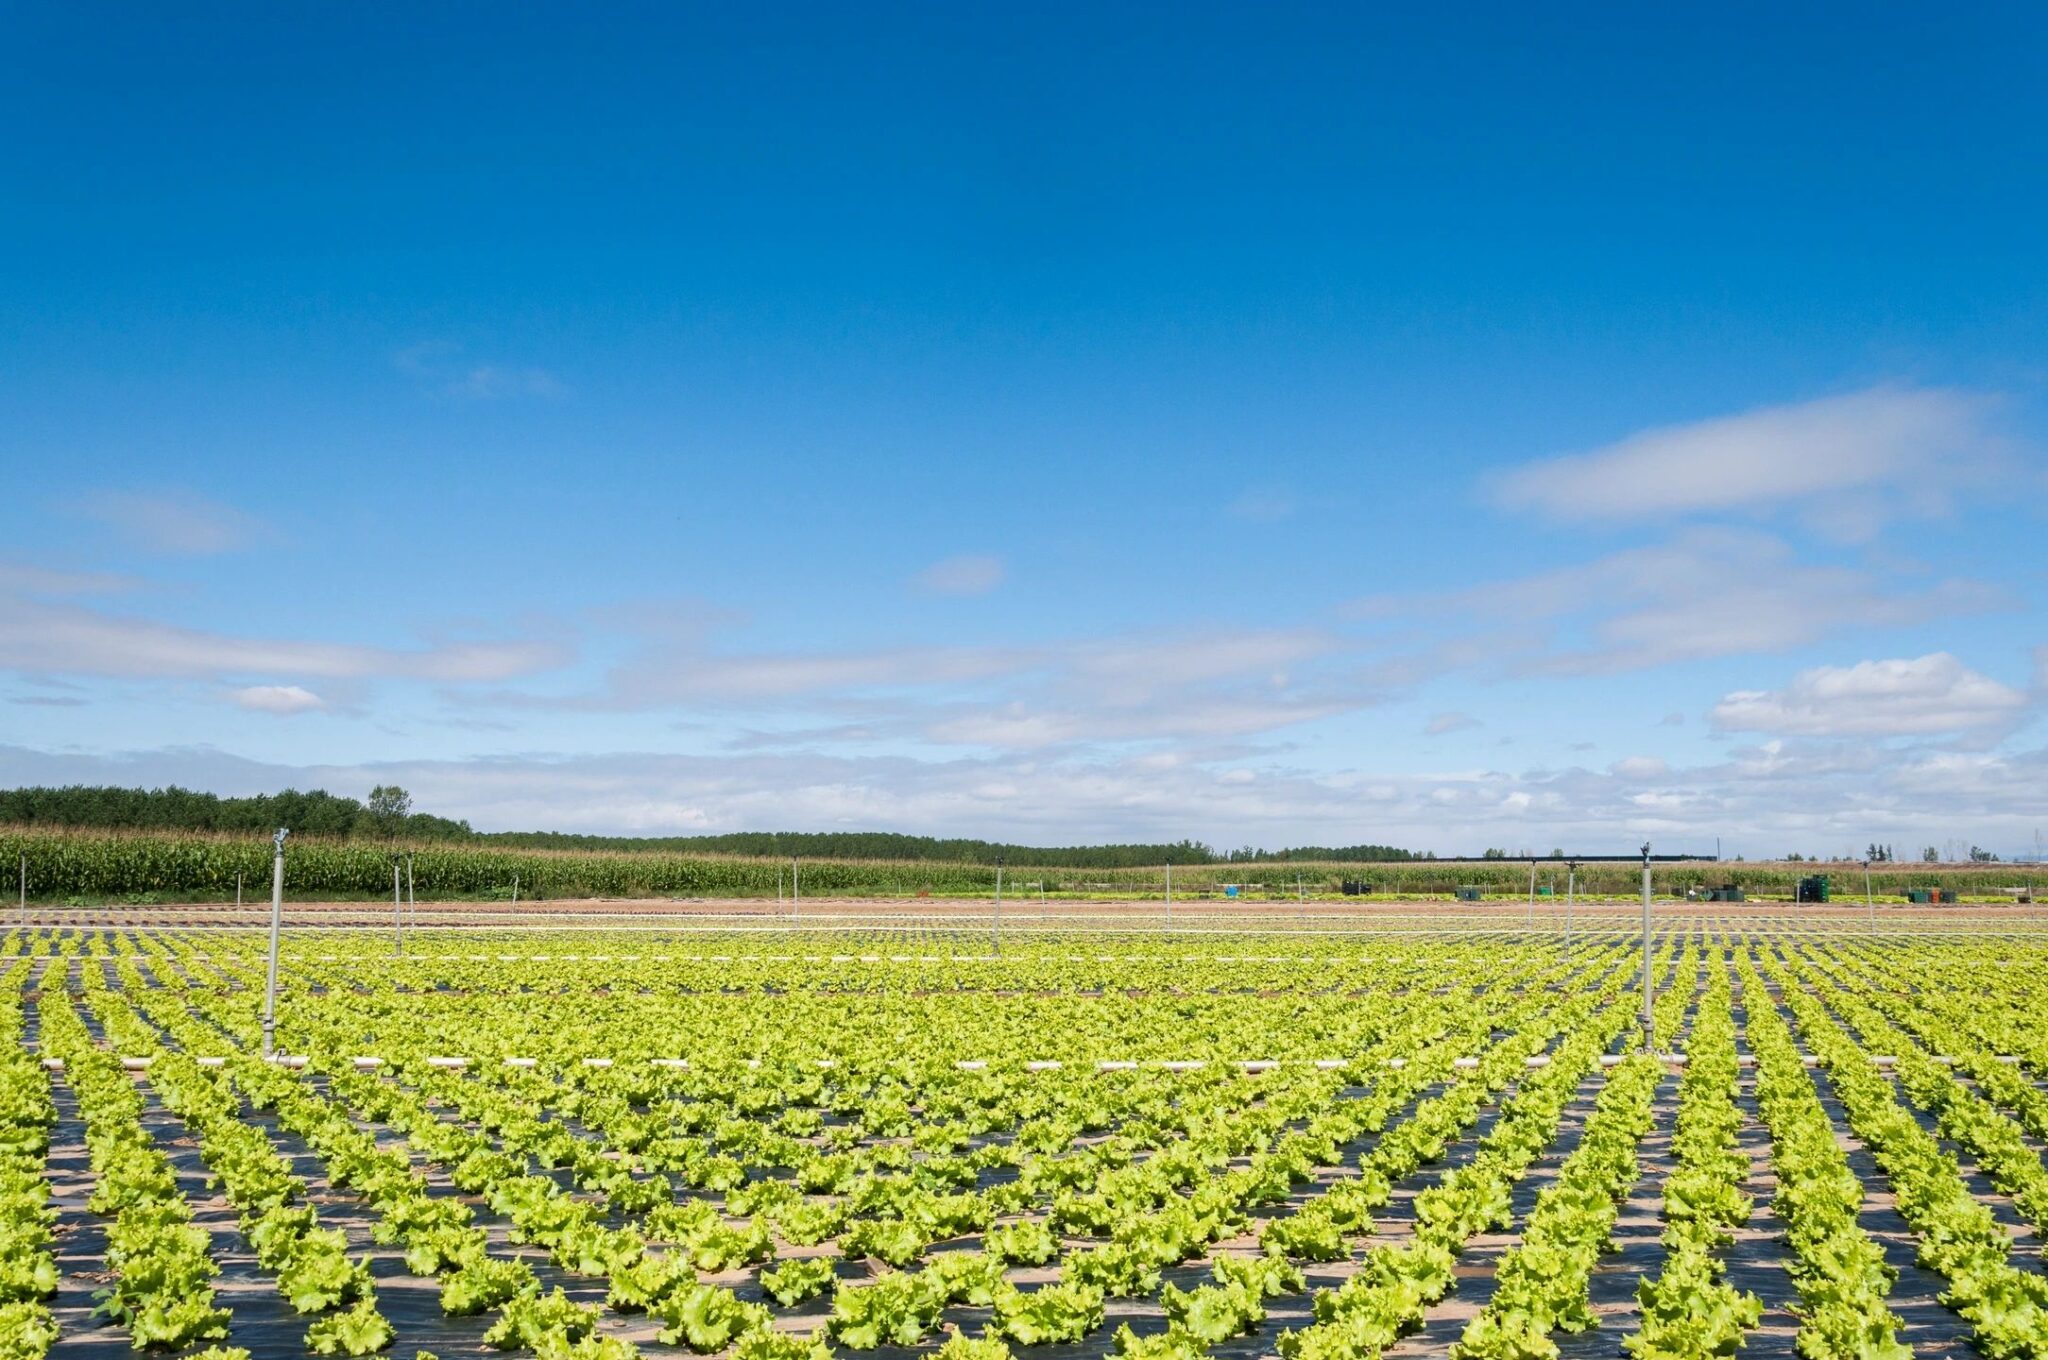 A wide shot of a farm field on a summer's day. Digital agriculture uses emerging technologies to collect crop data that can be used to enhance agricultural outcomes.